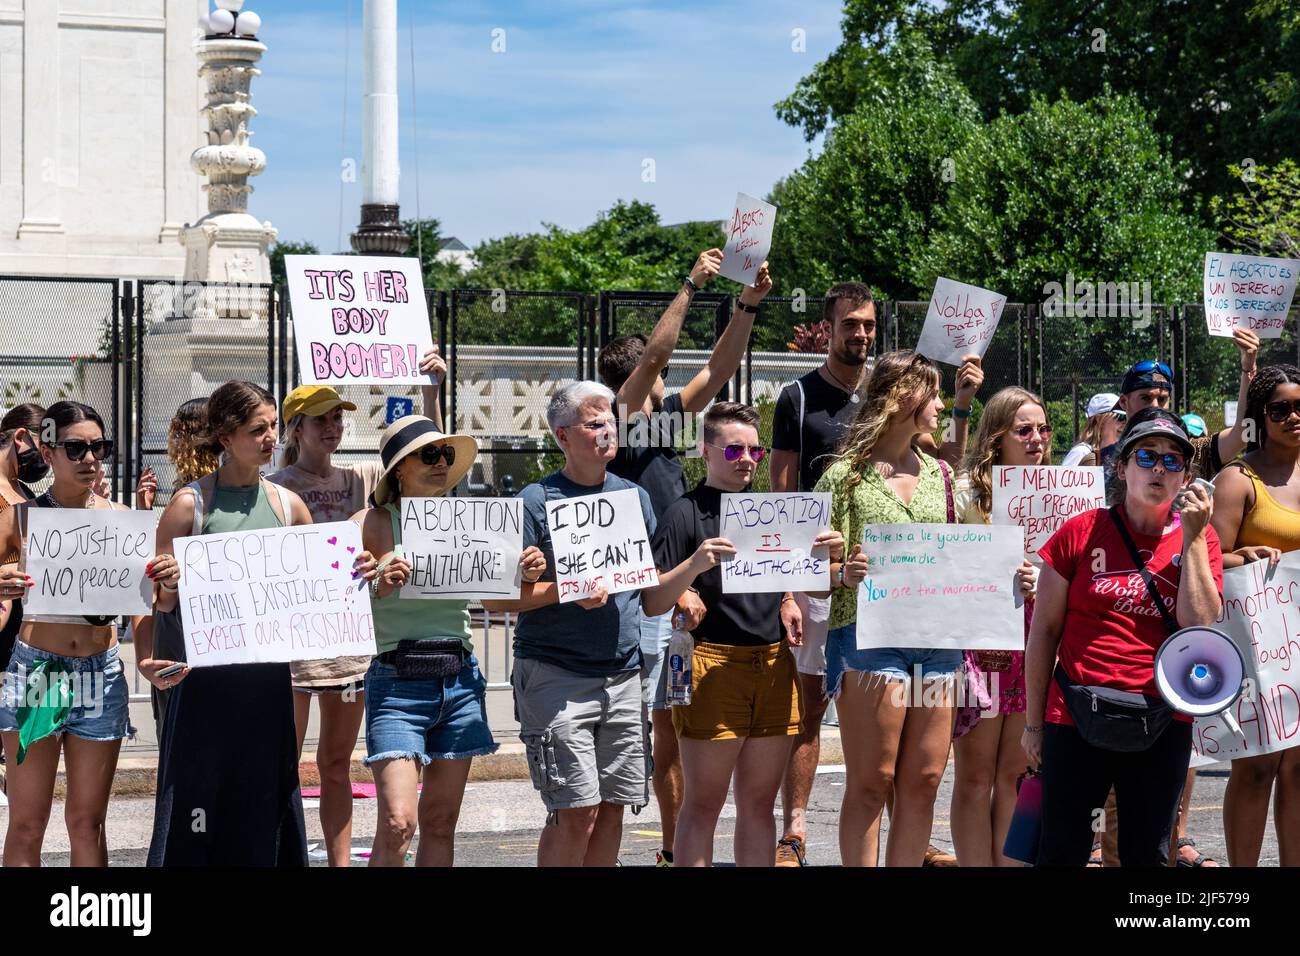 Washington, DC - June 28, 2022: Pro Abortion protesters in front of the Supreme Court building. Stock Photo